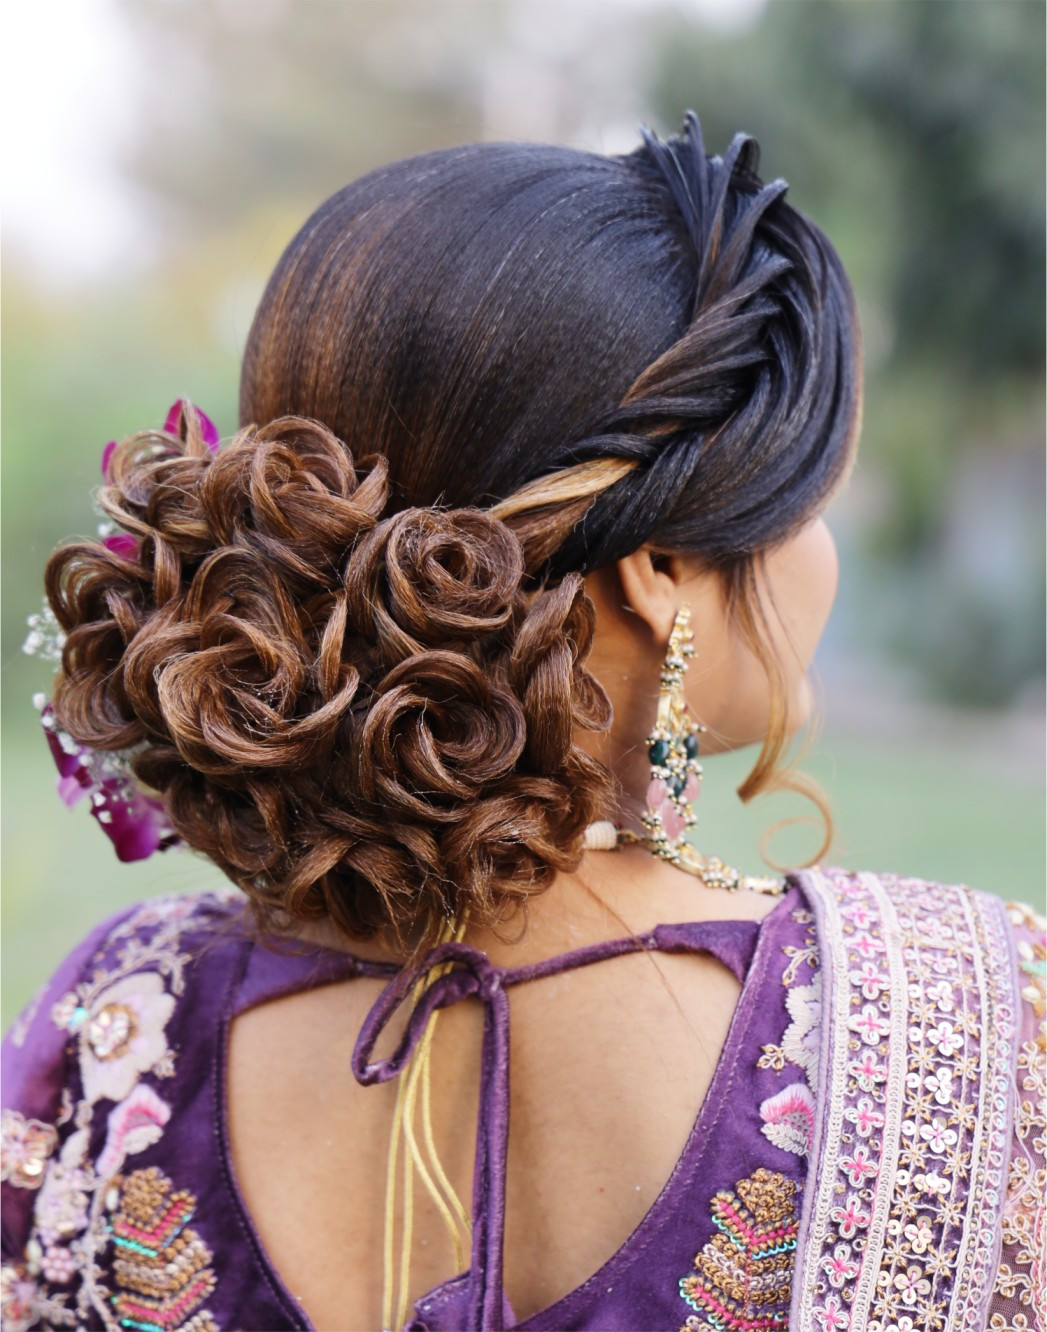 Twisting Rose Hair Style - Md0062